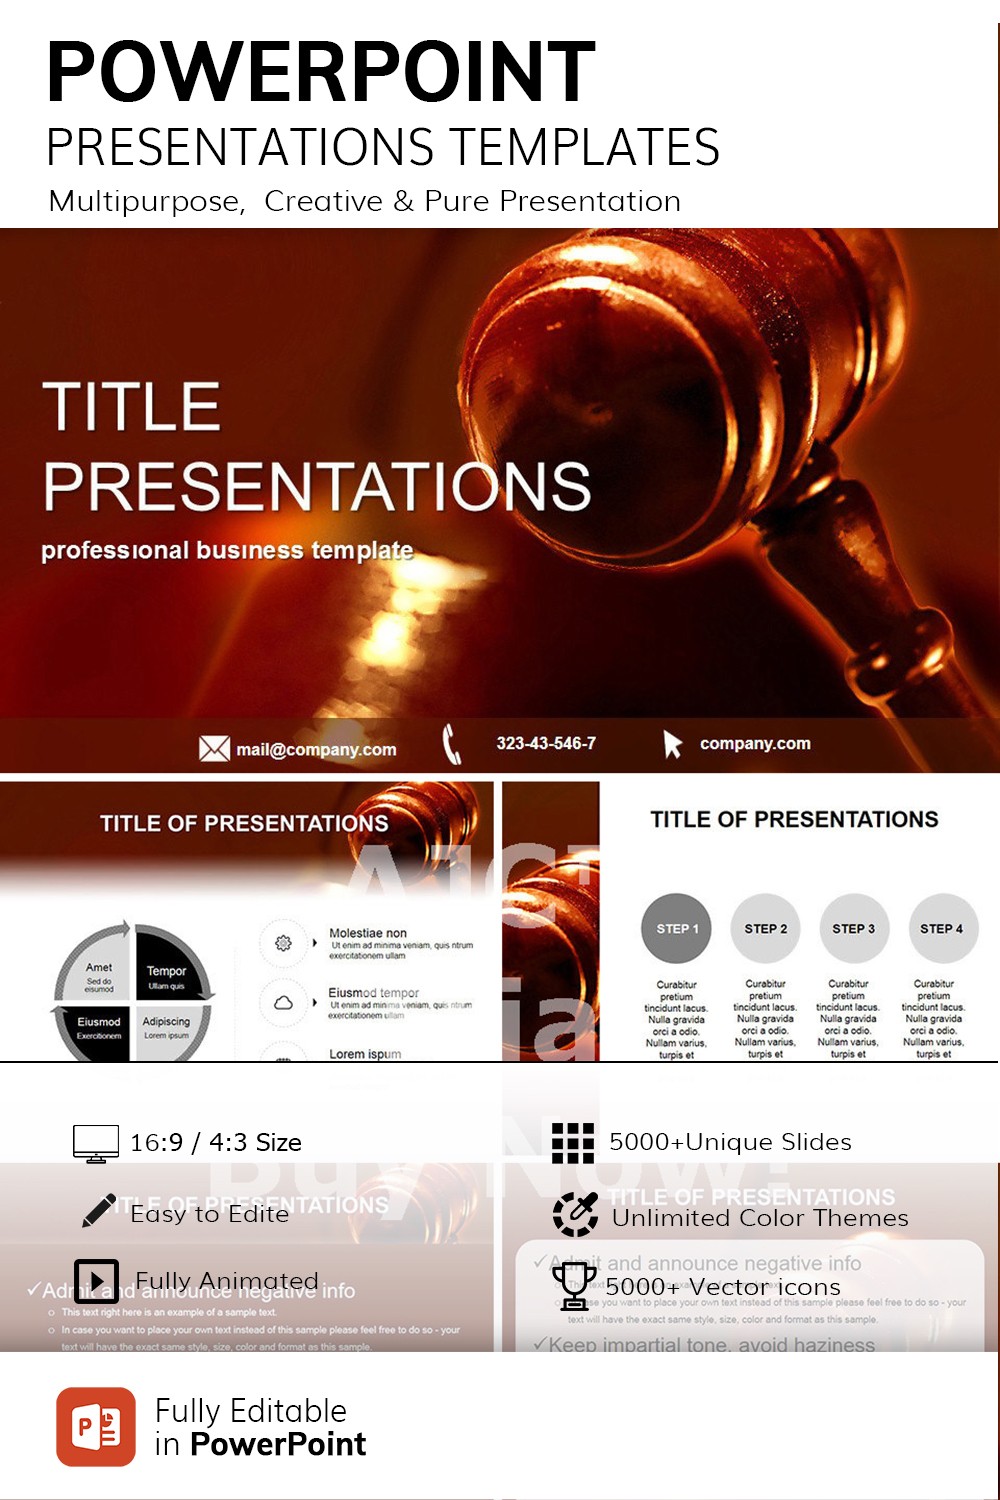 legal-system-powerpoint-template-imaginelayout